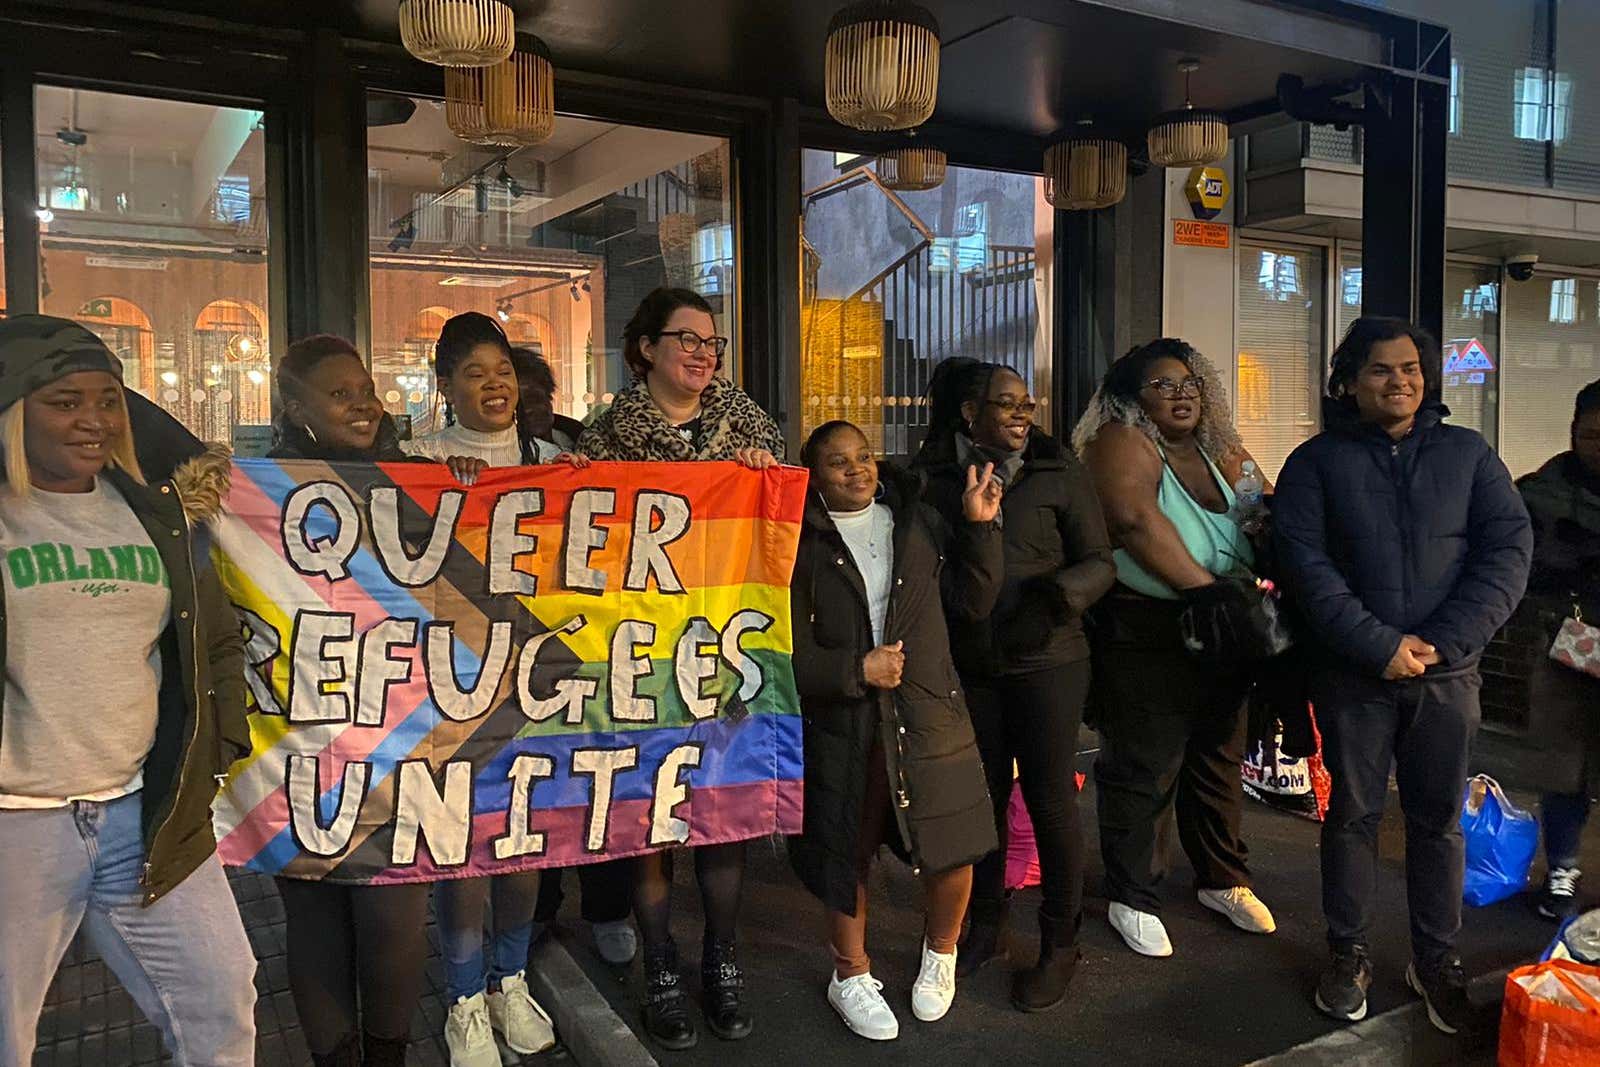 Sarah Cope (middle) with members of Queer Refugee Unite who will attend the Pride Parade in London to ‘affirm and celebrate’ LGBTQ+ asylum seekers